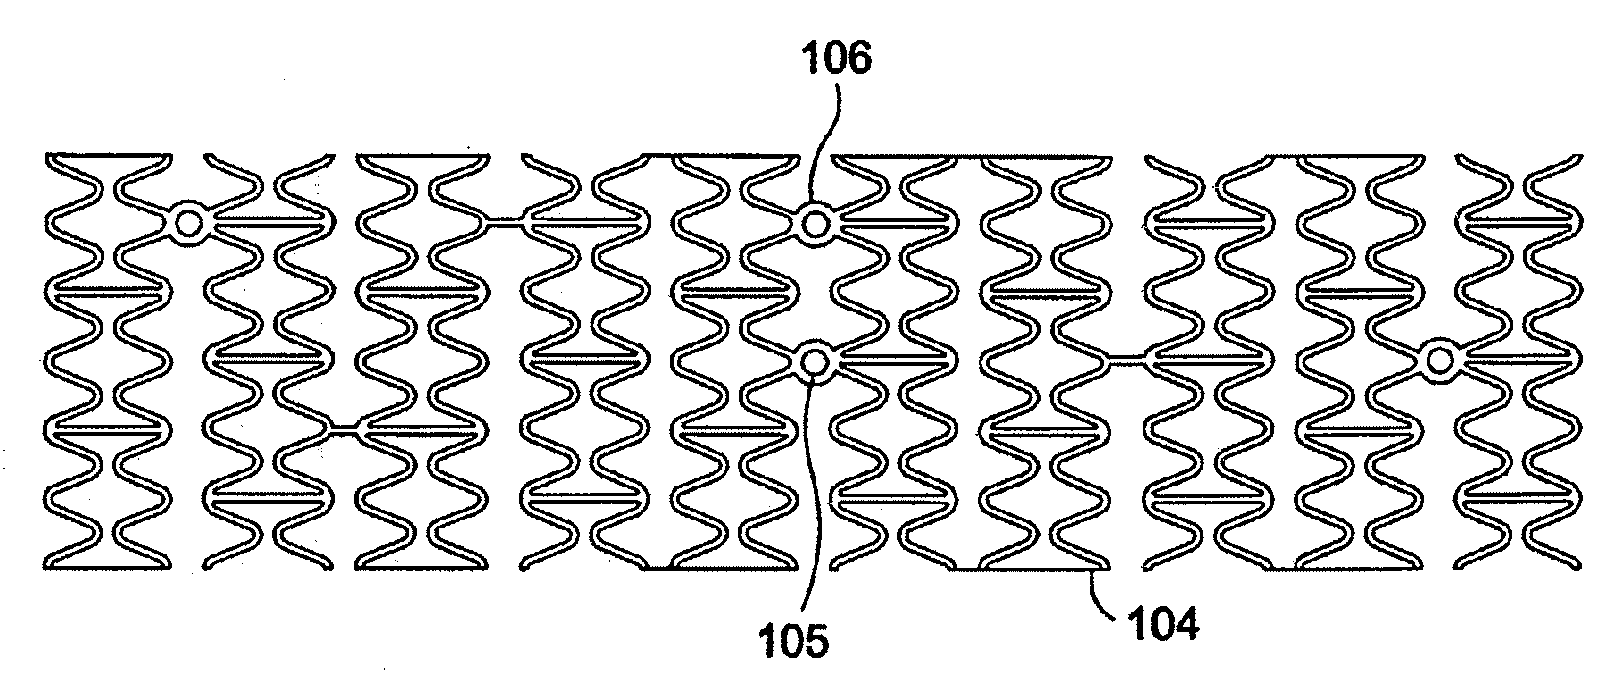 Endovascular device